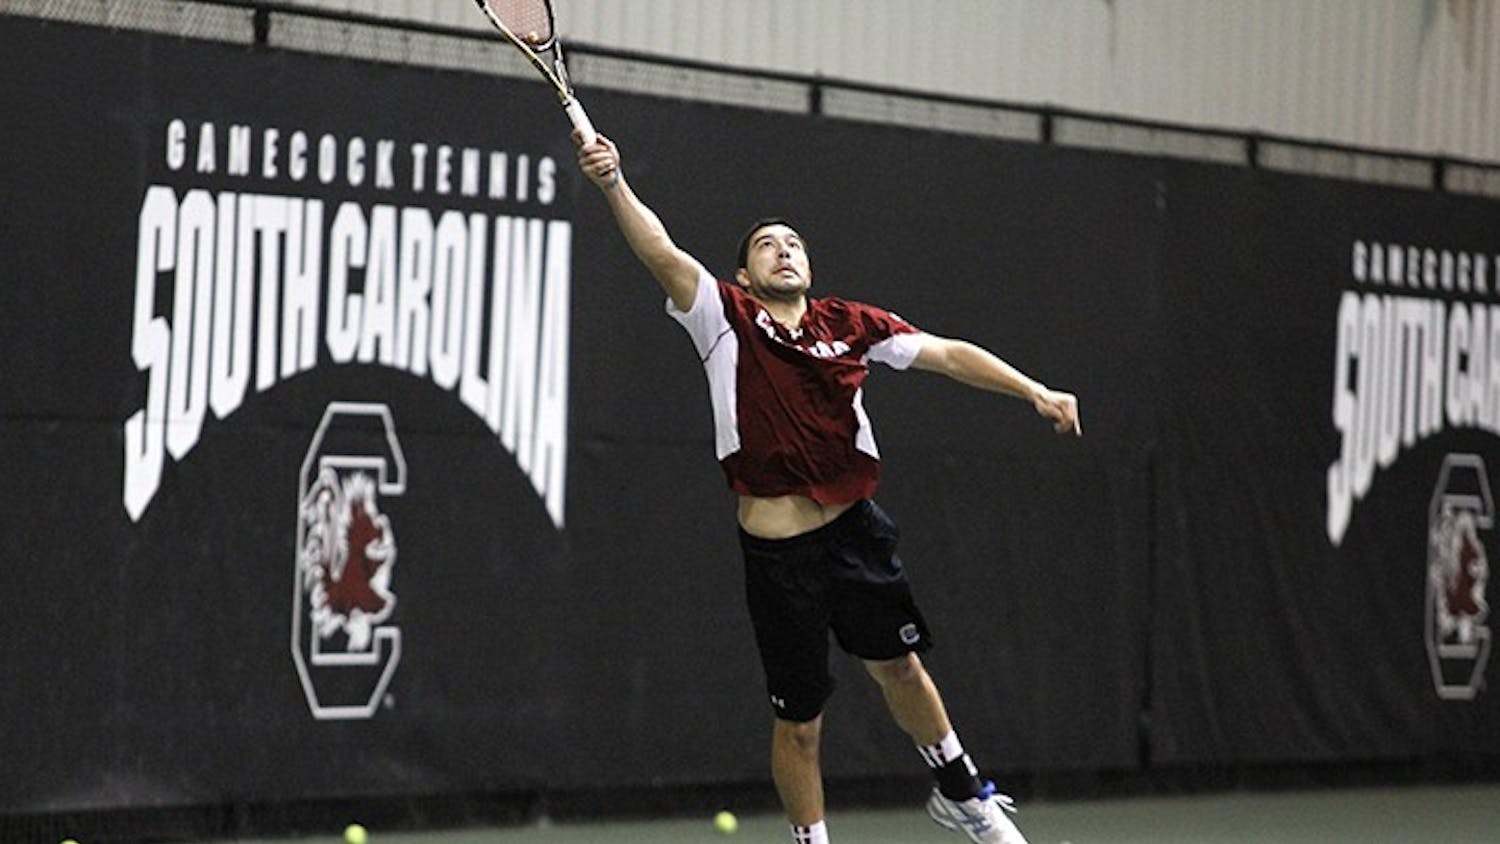 	Seniors Tsvetan Mihov (pictured) and Chip Cox were the two seniors on the South Carolina roster that played their last home game on Sunday.